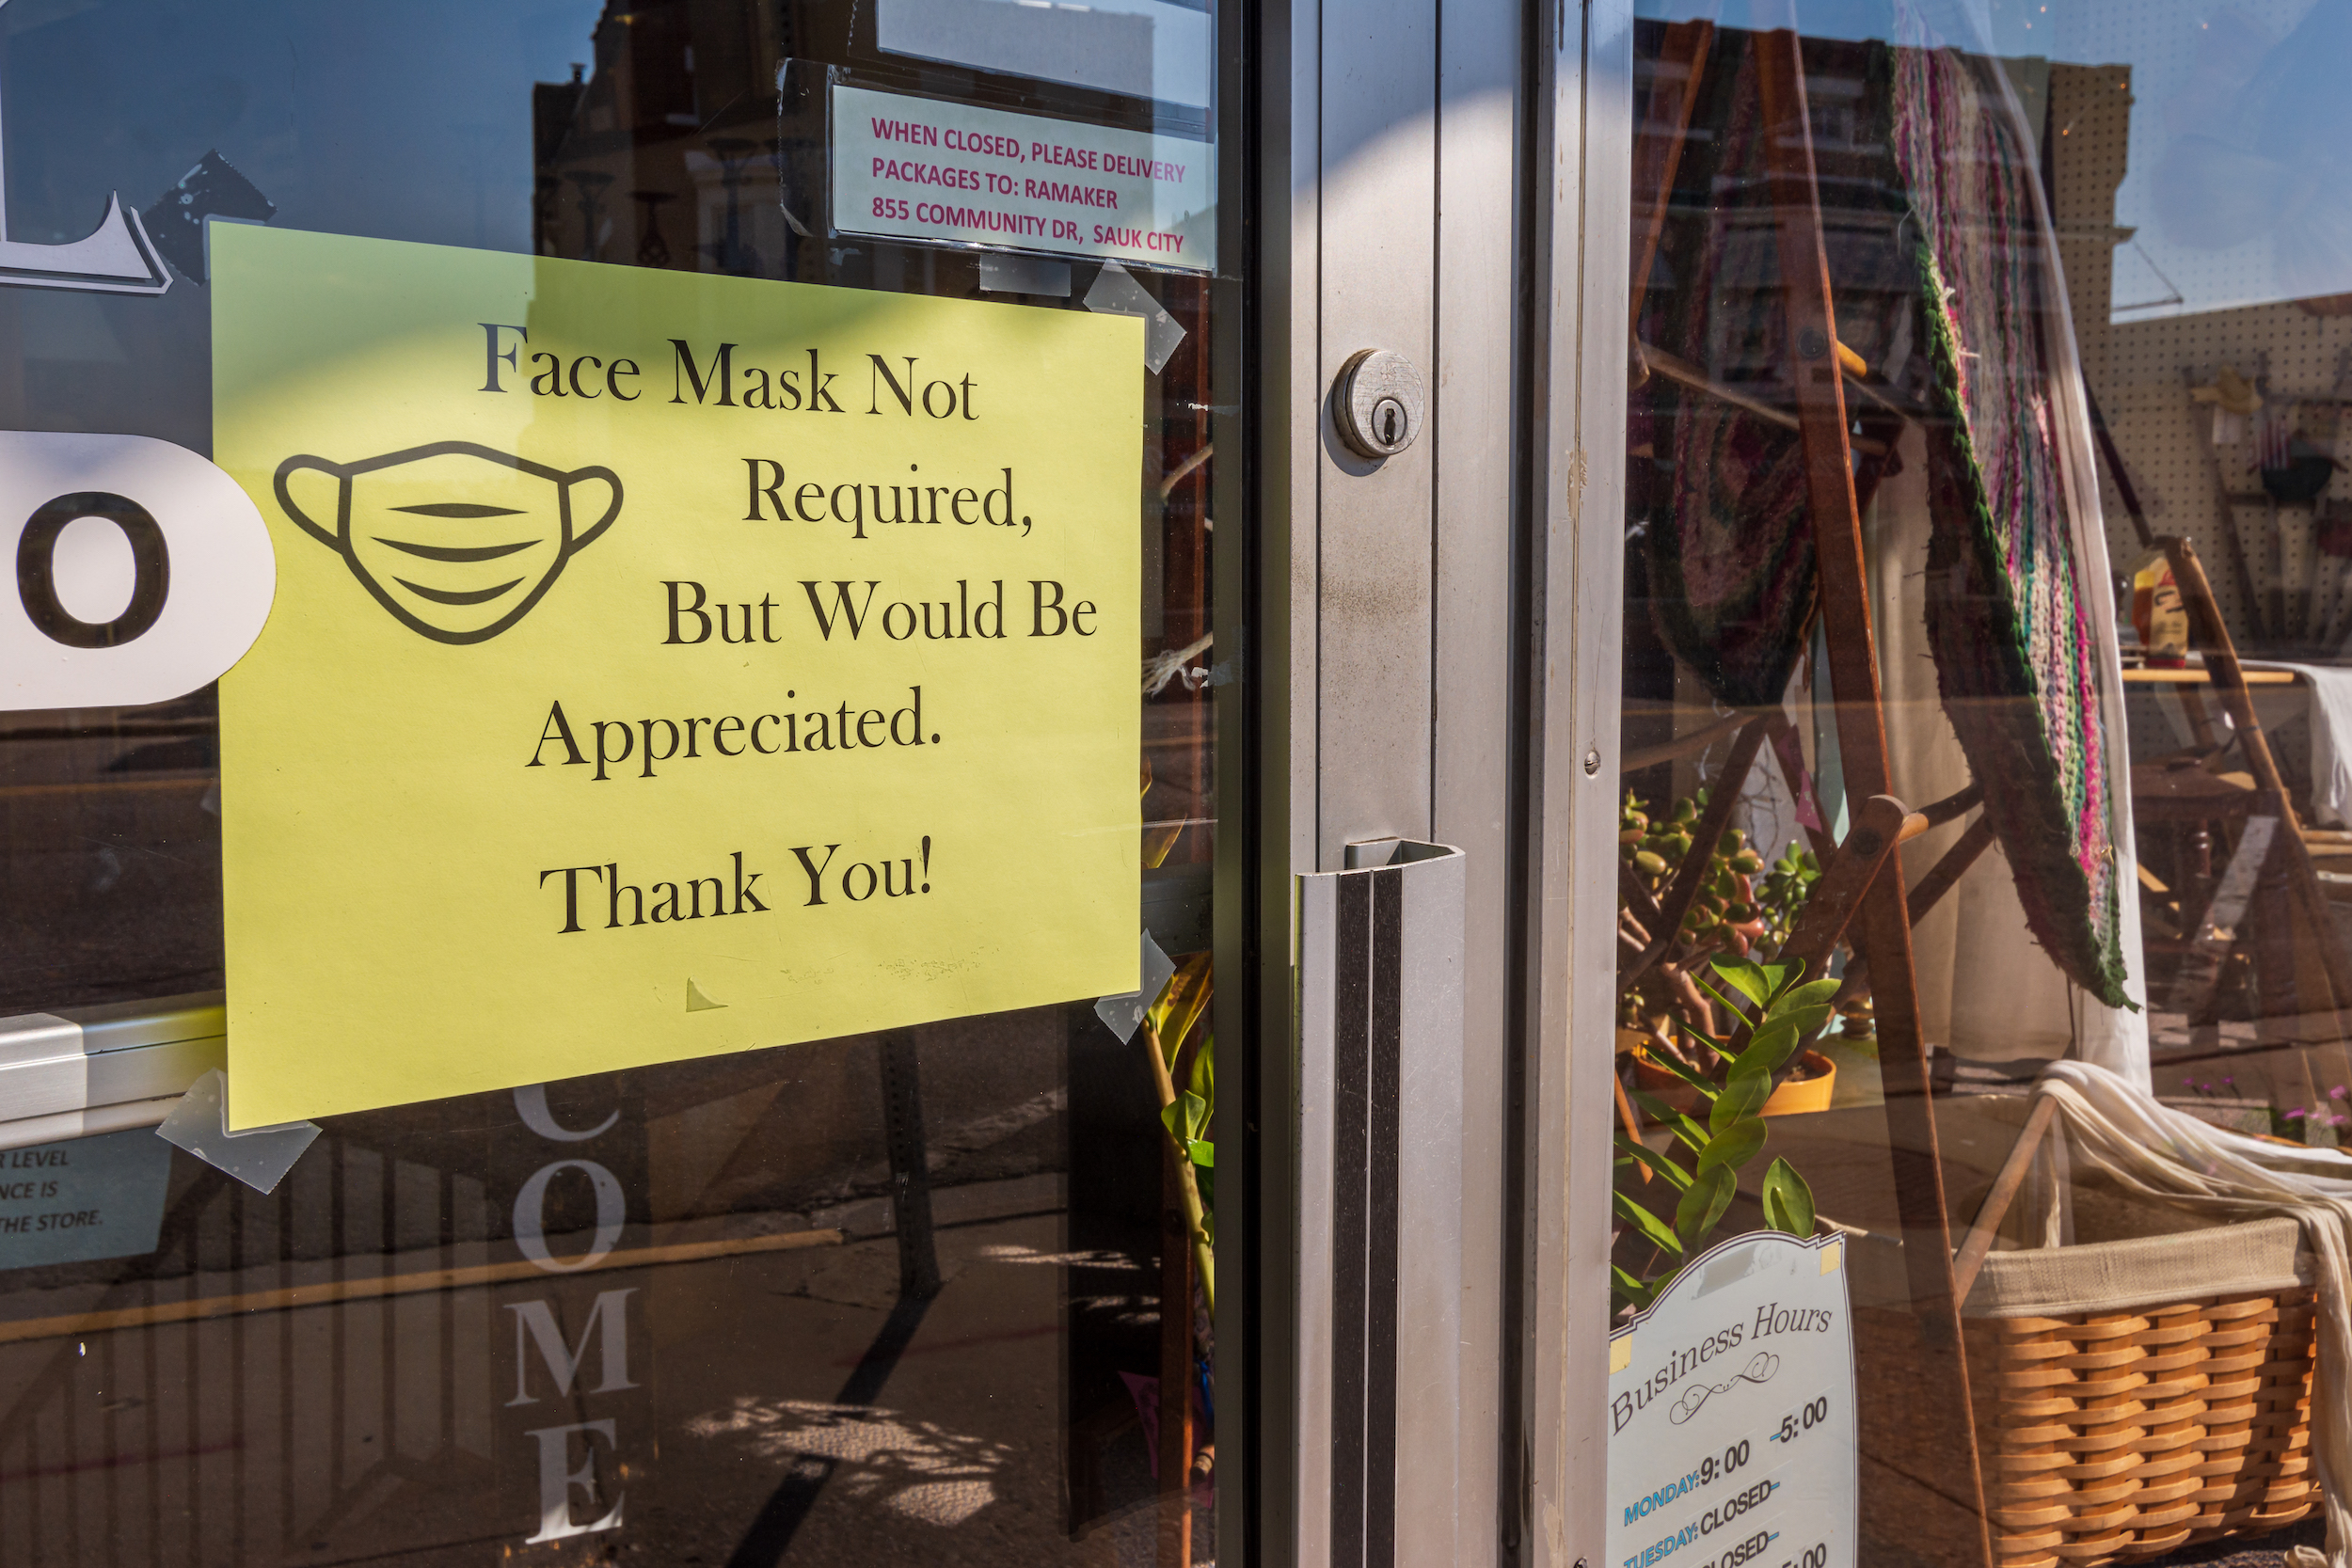 "Face mask not required" sign at a business in Sauk City, Wis.